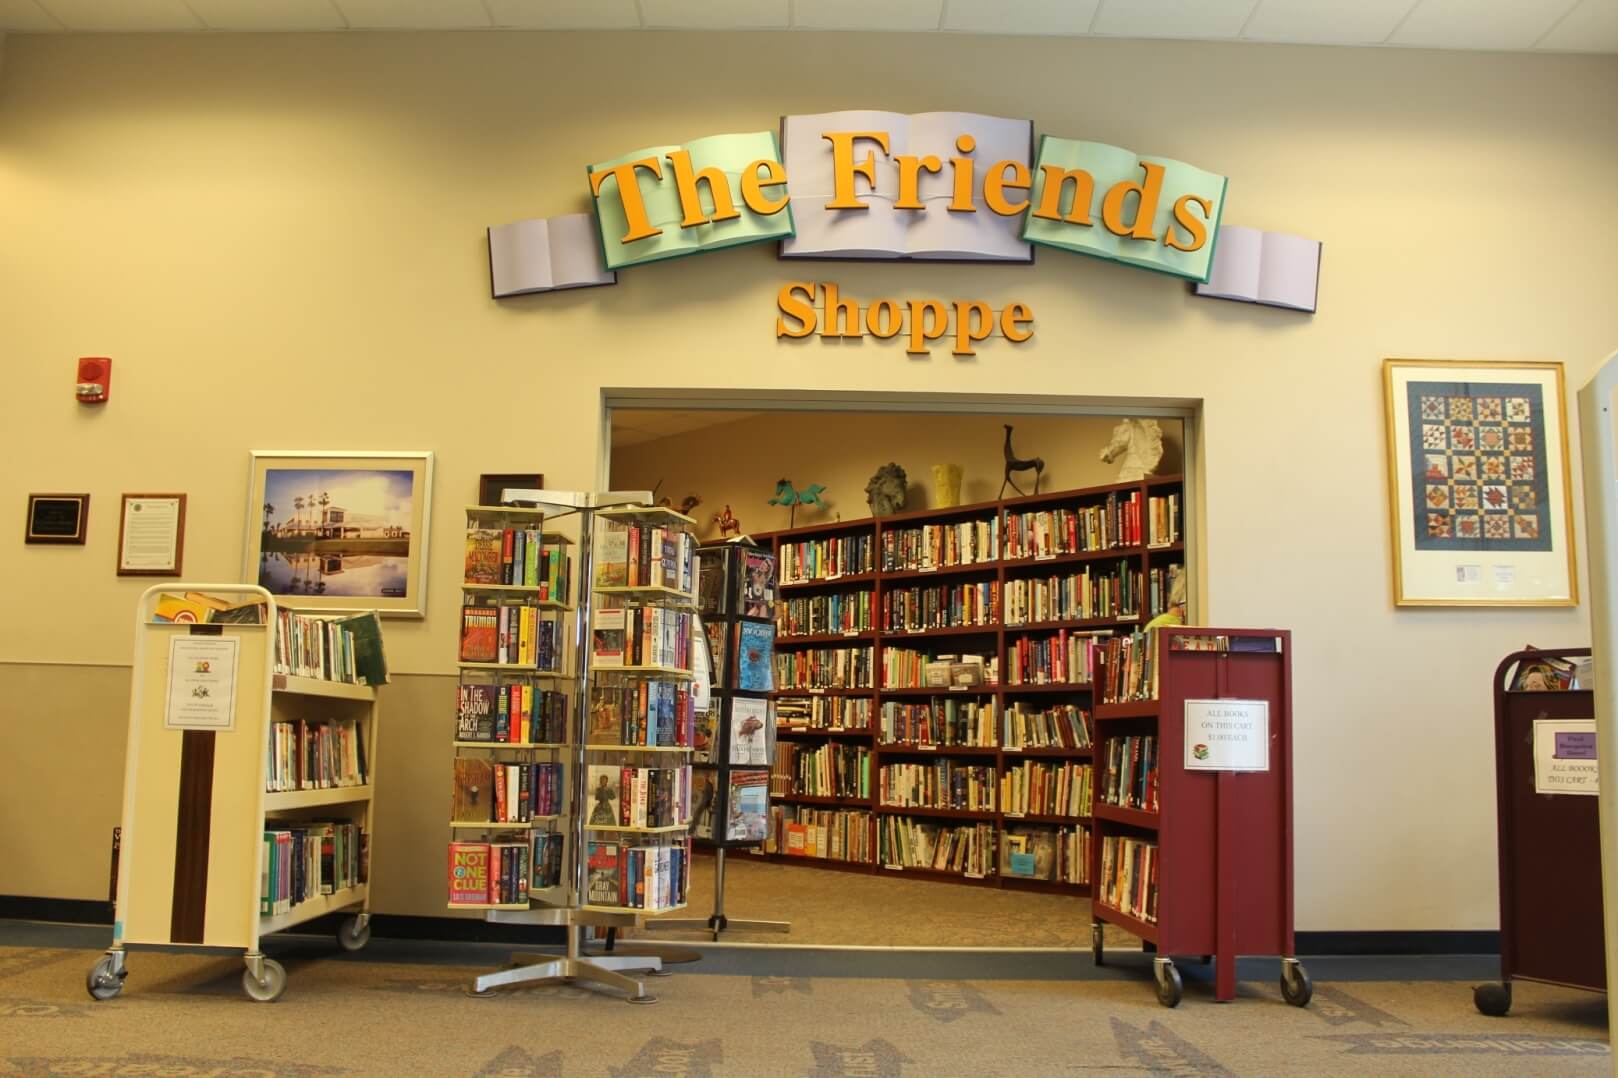 The Friend Shoppe at Seminole Community Library